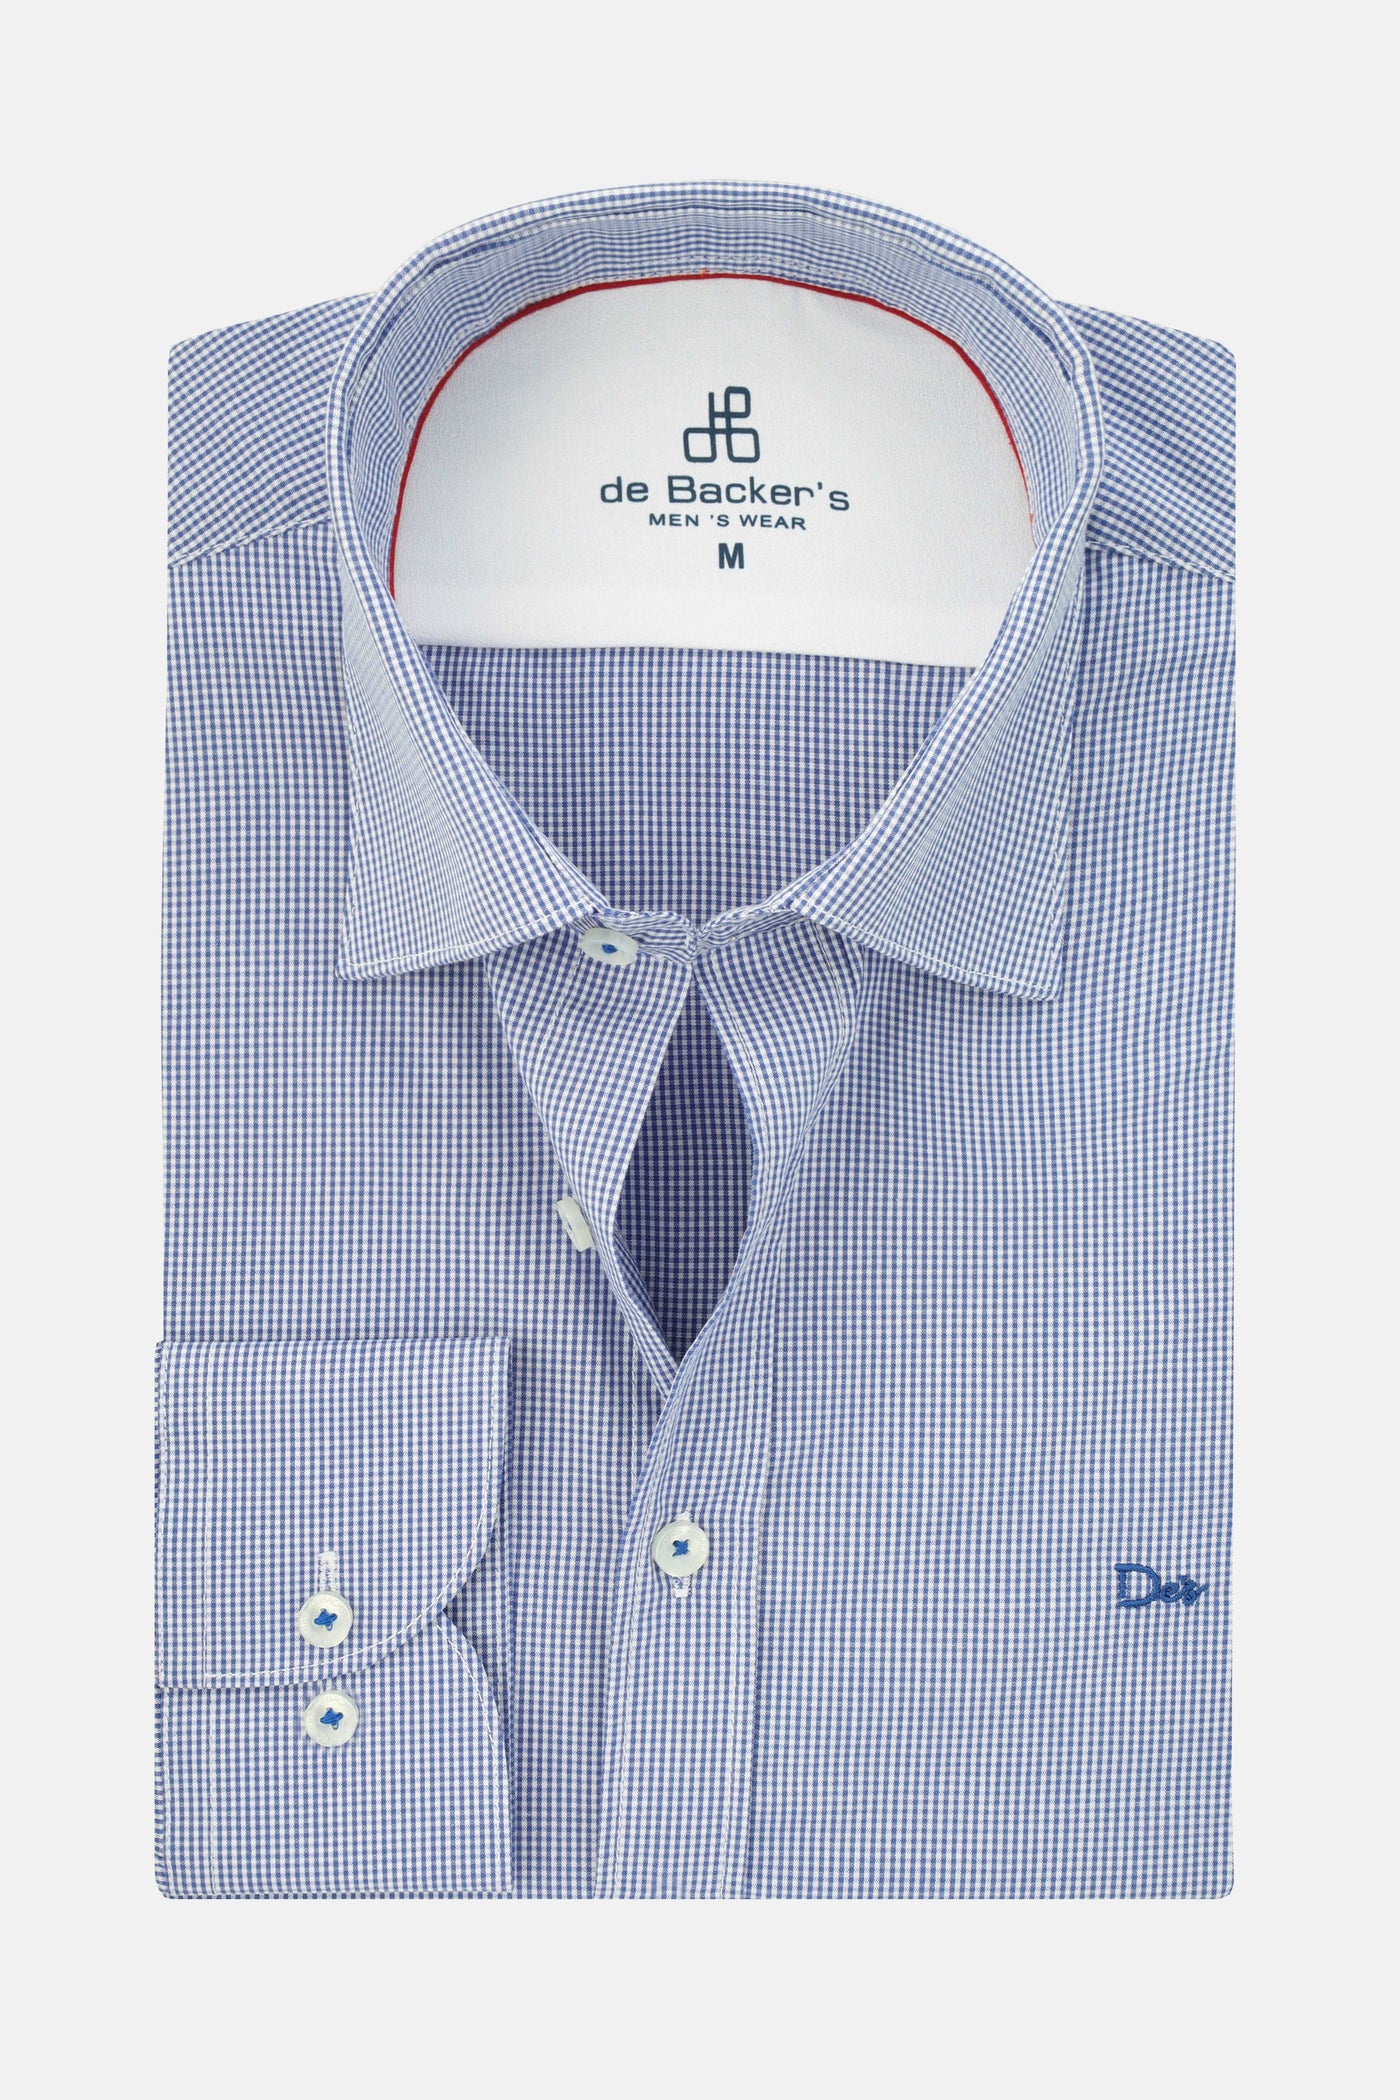 Checked Blue & White Smart Casual Shirt